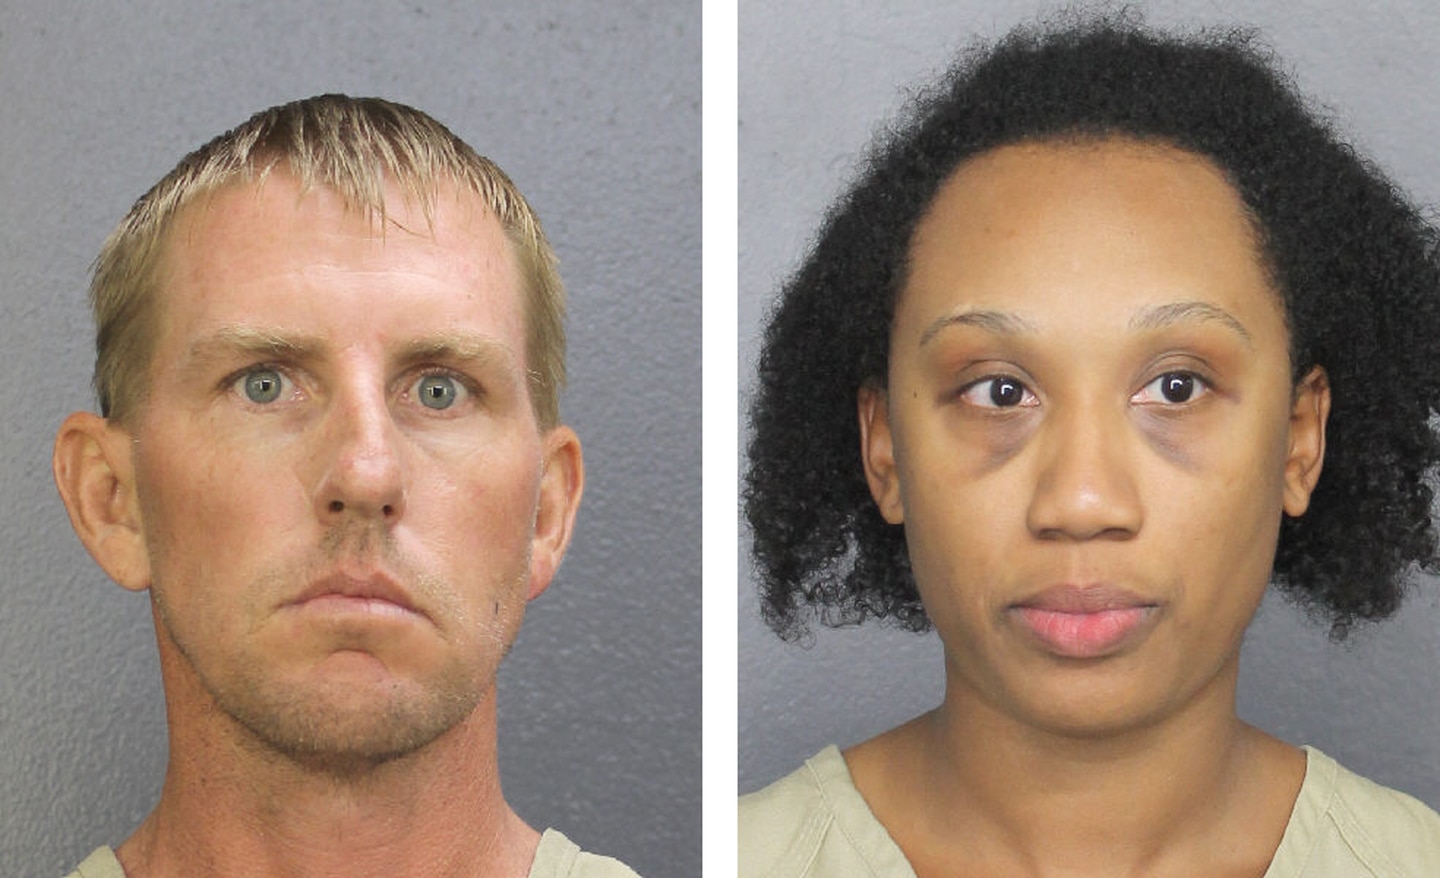 Brandon Martin and Tameko Lindo, of Boca Raton, were sentenced last summer on money laundering charges in connection with running a prostitution ring using Priceline.com.